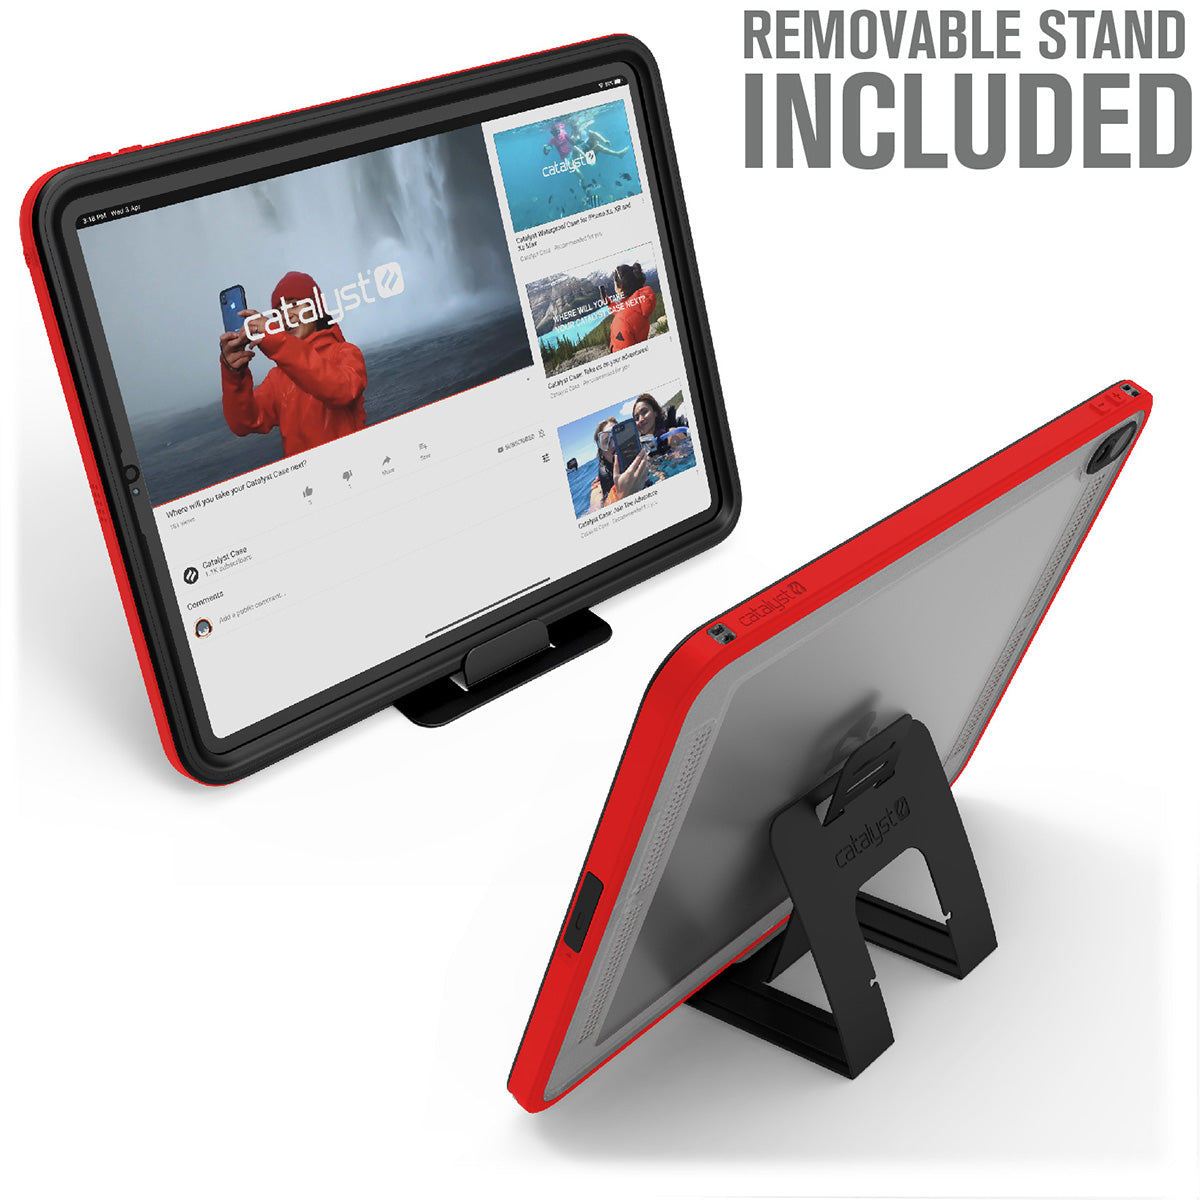 Catalyst waterproof case for ipad pro gen 3 12.9in red front and back packaging Text reads Removable stand included